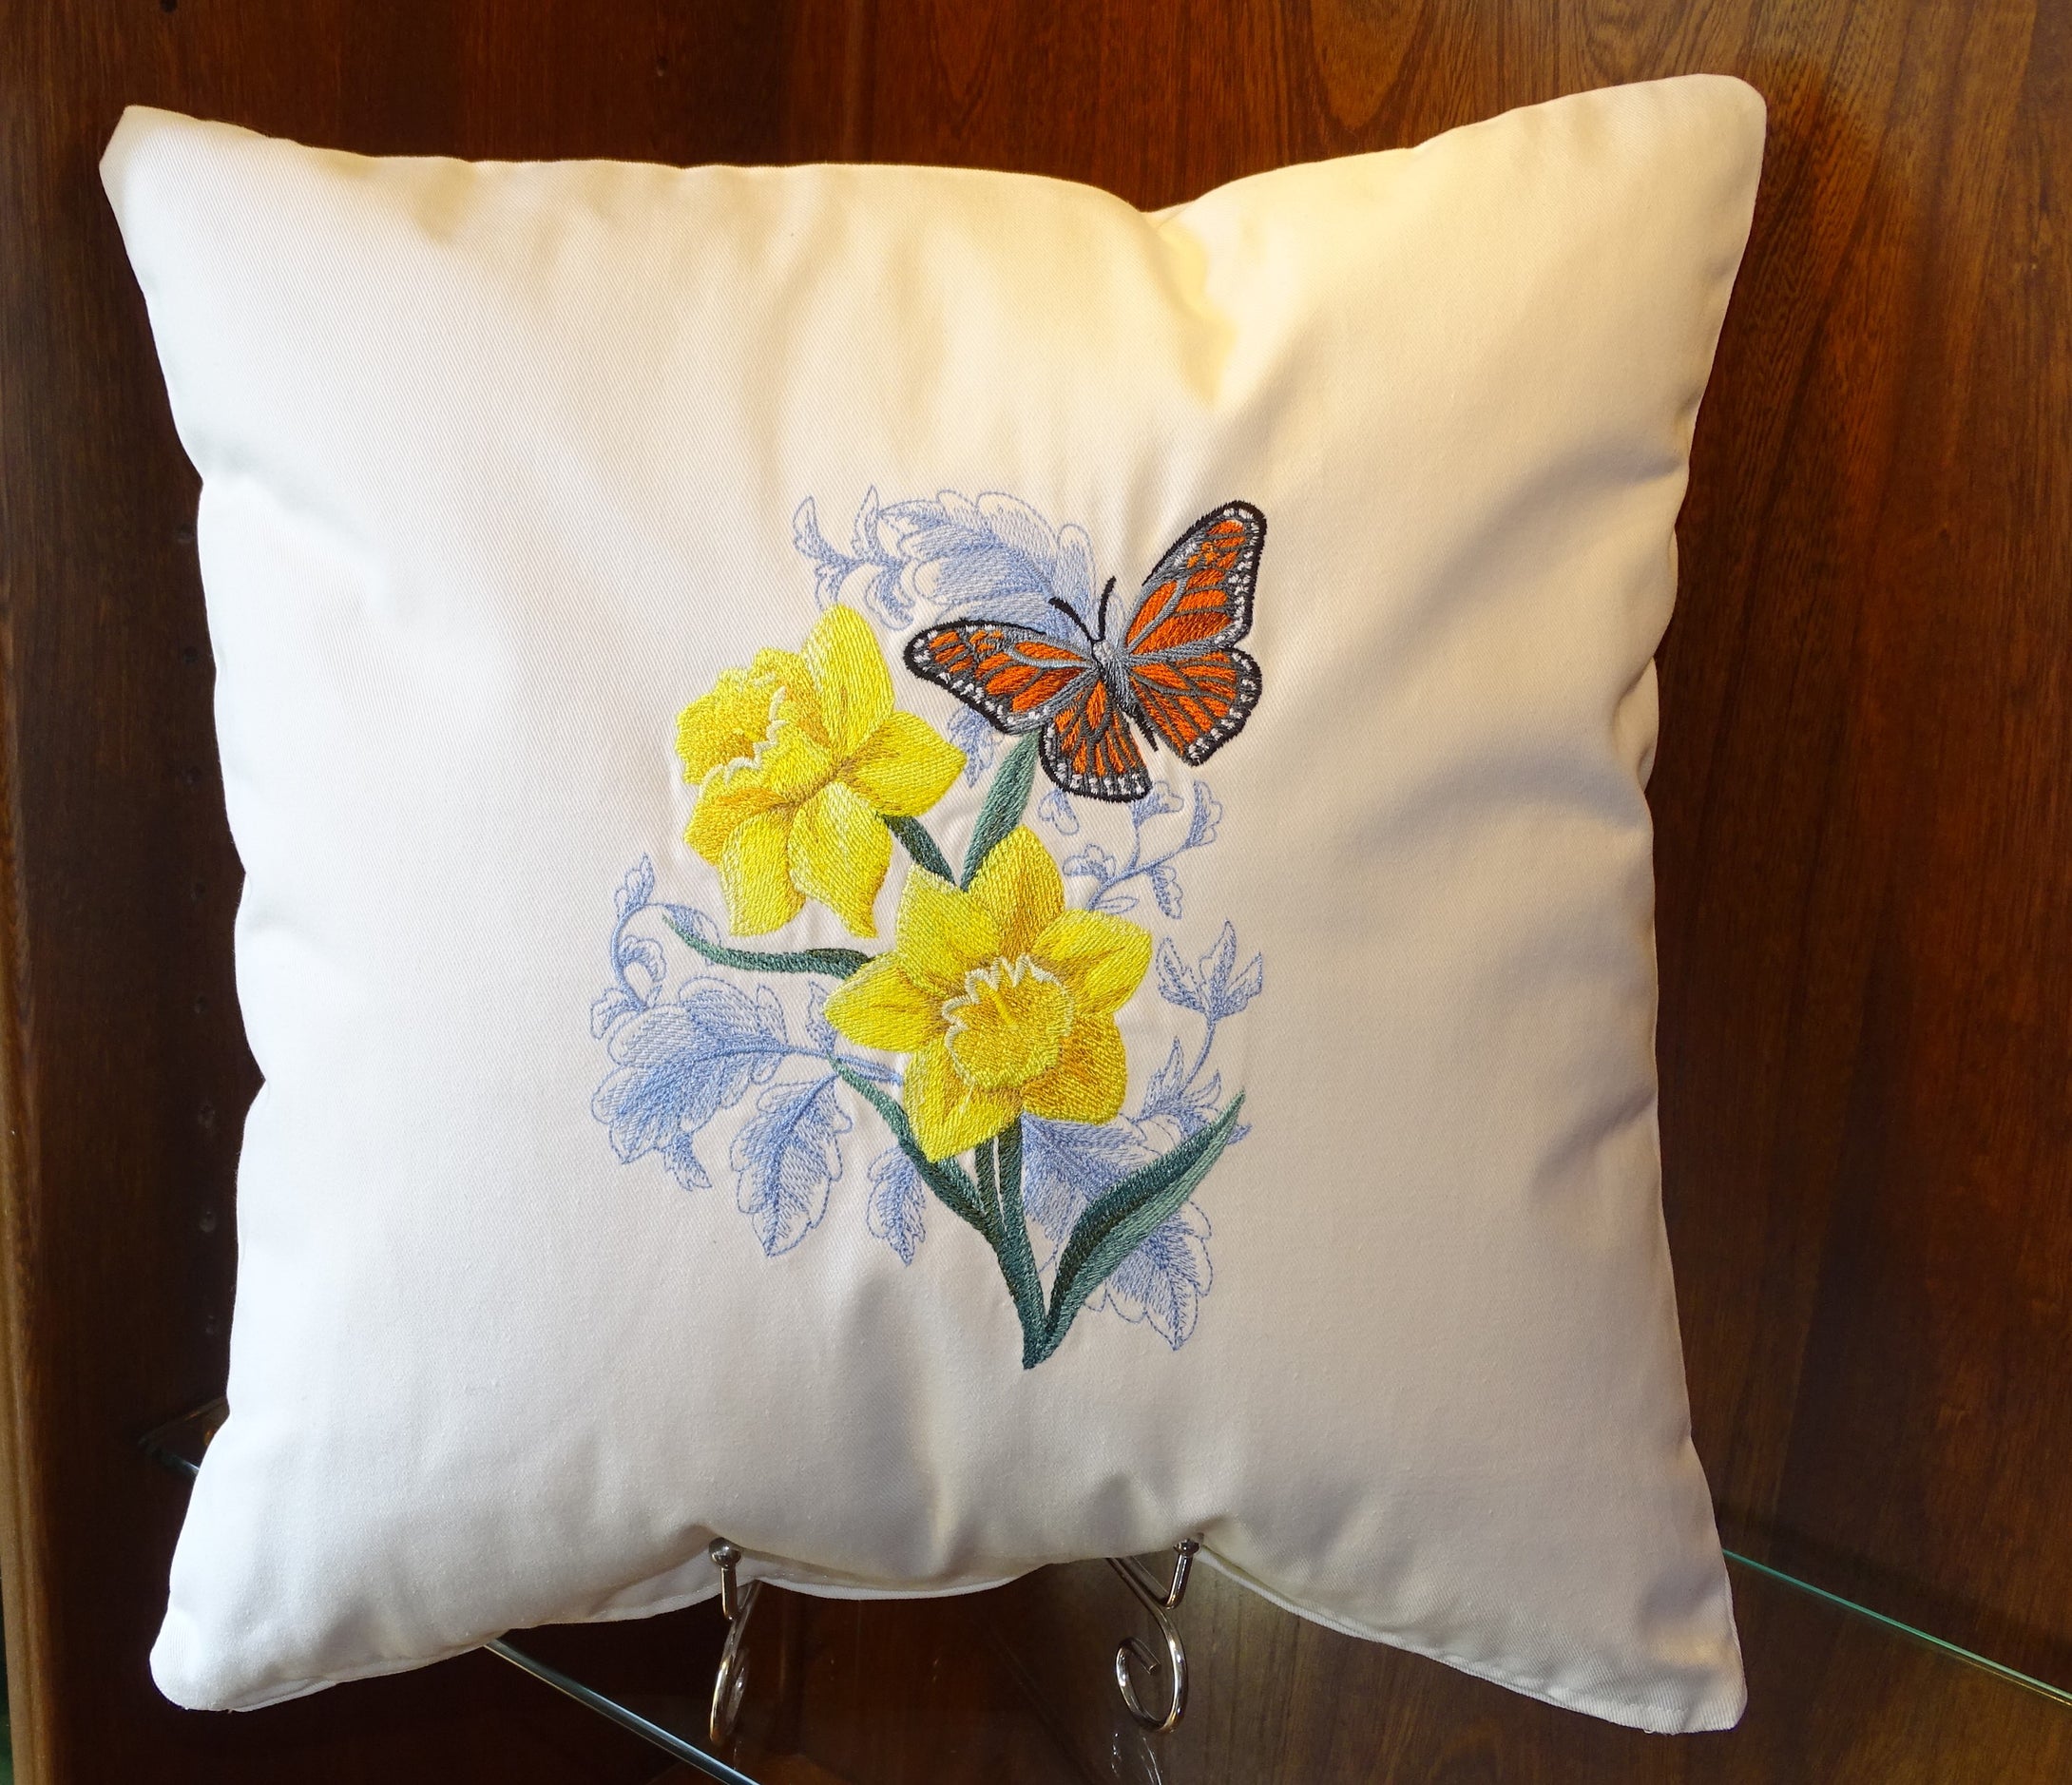 Recreated from our original Butterfly & Daffodils embroidery on 100% cotton twill fabric